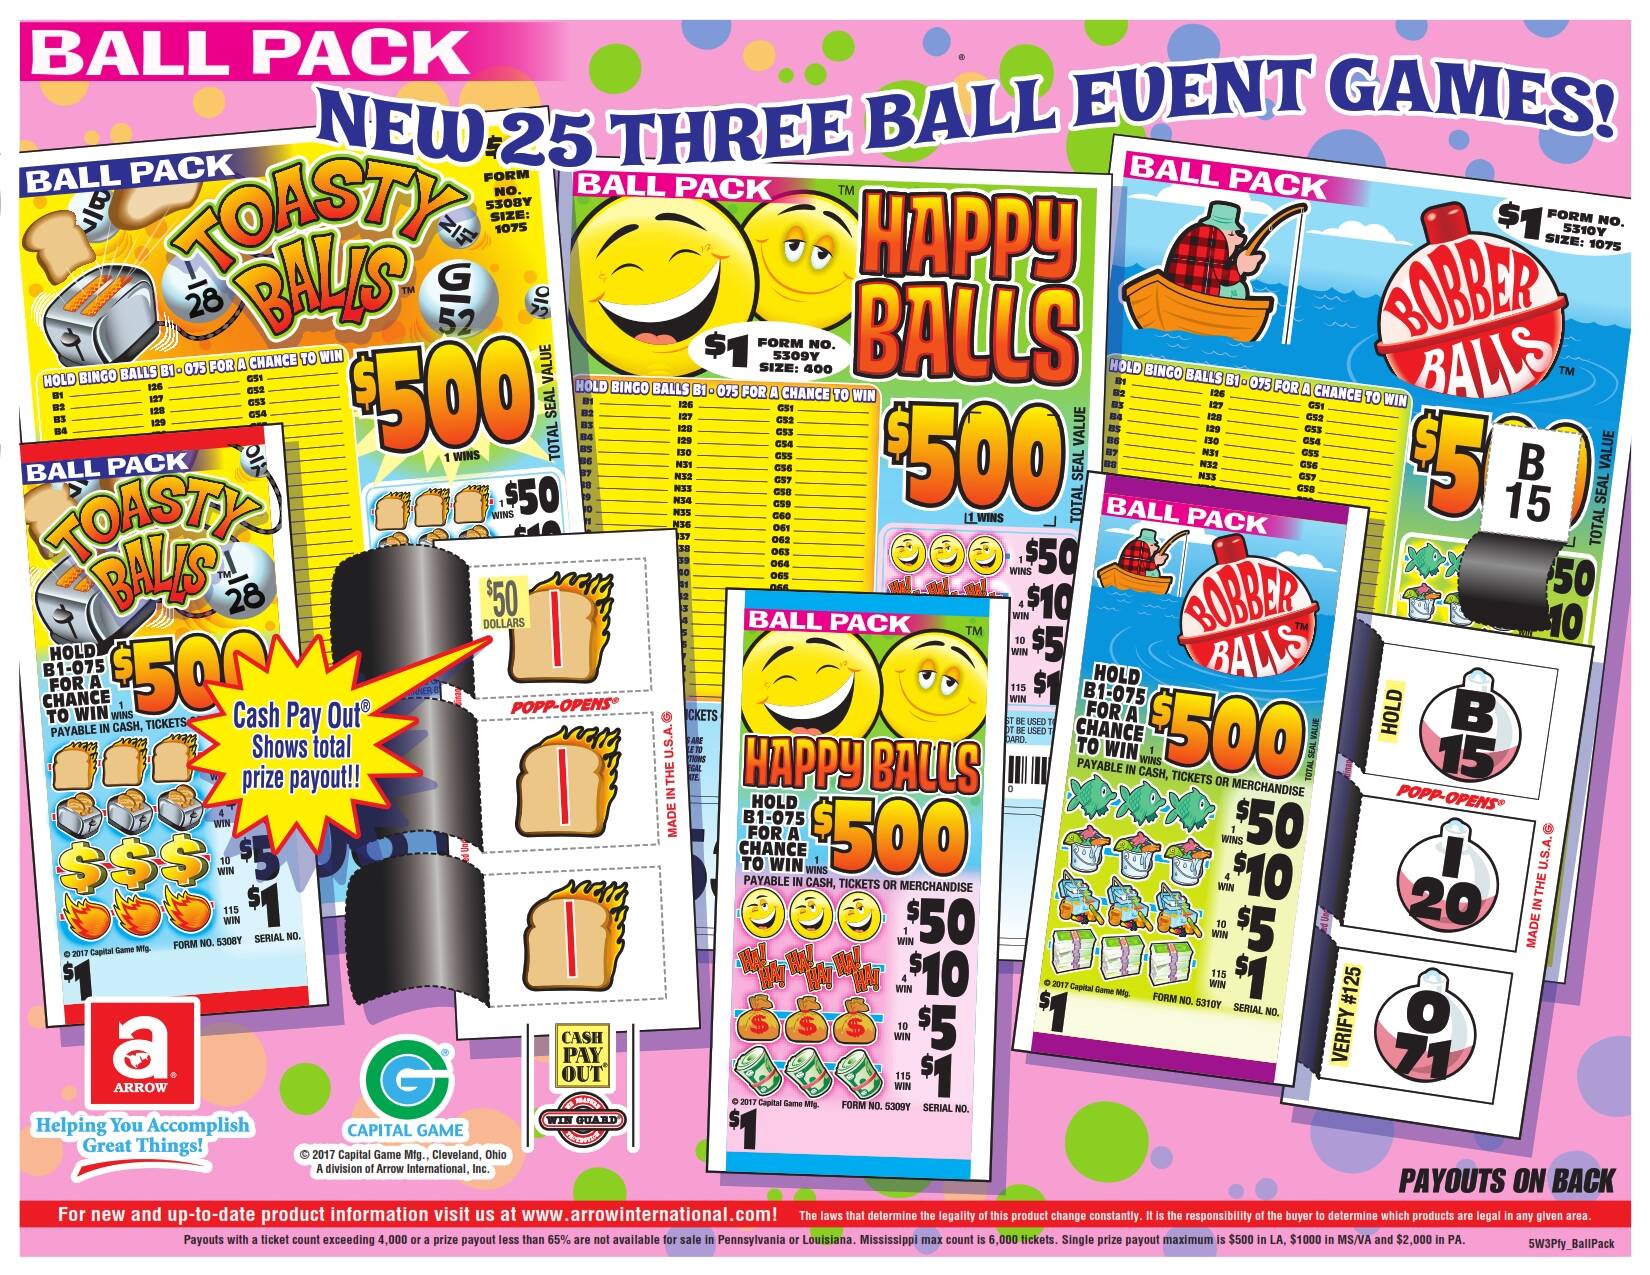 Love Birds $130 Bingo Pull Tab Event Game All Tickets Playable